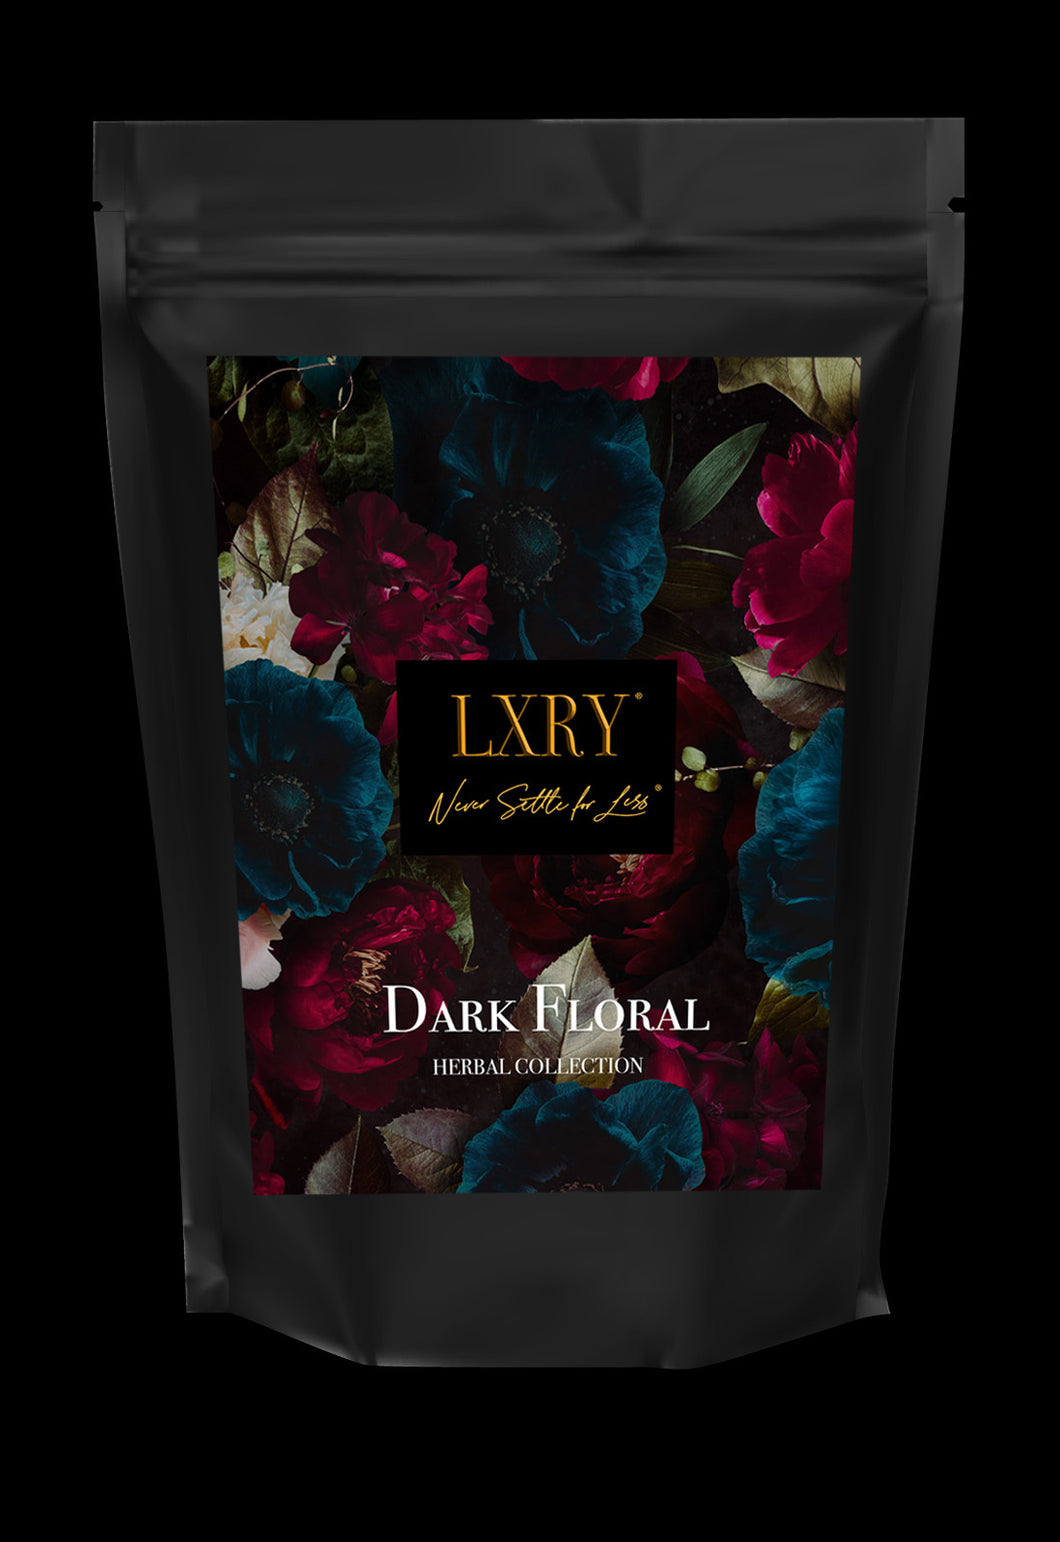 Dark Floral (Herbal Collection) with Kava